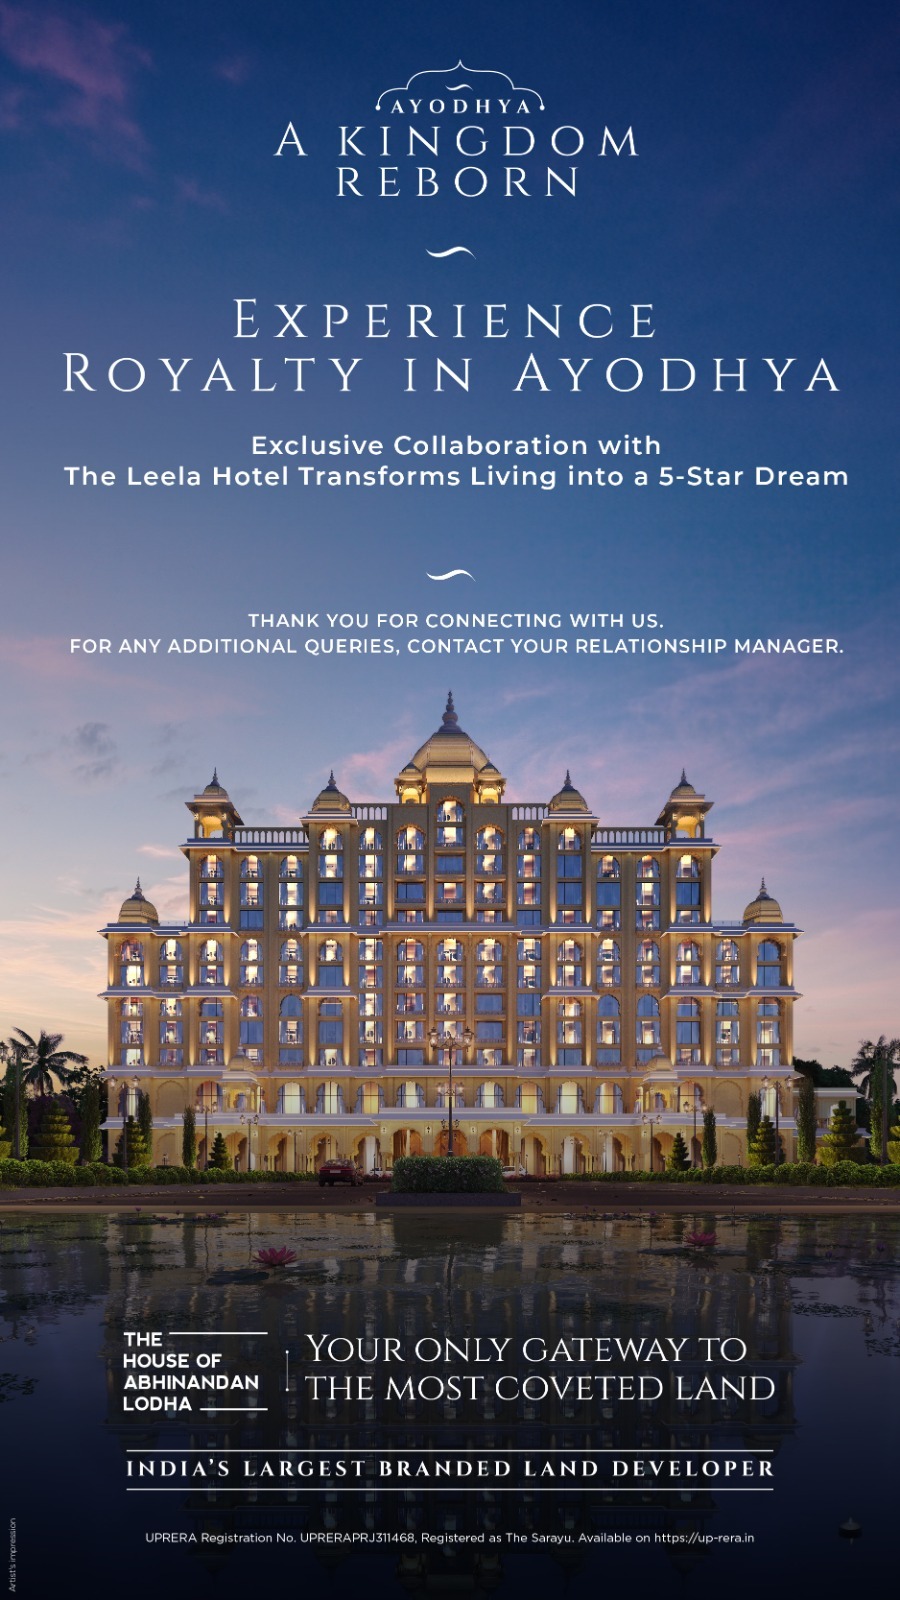 Abhinandan Lodha's Ayodhya Project: The Resurgence of Regal Living in India's Most Prized Locale Update